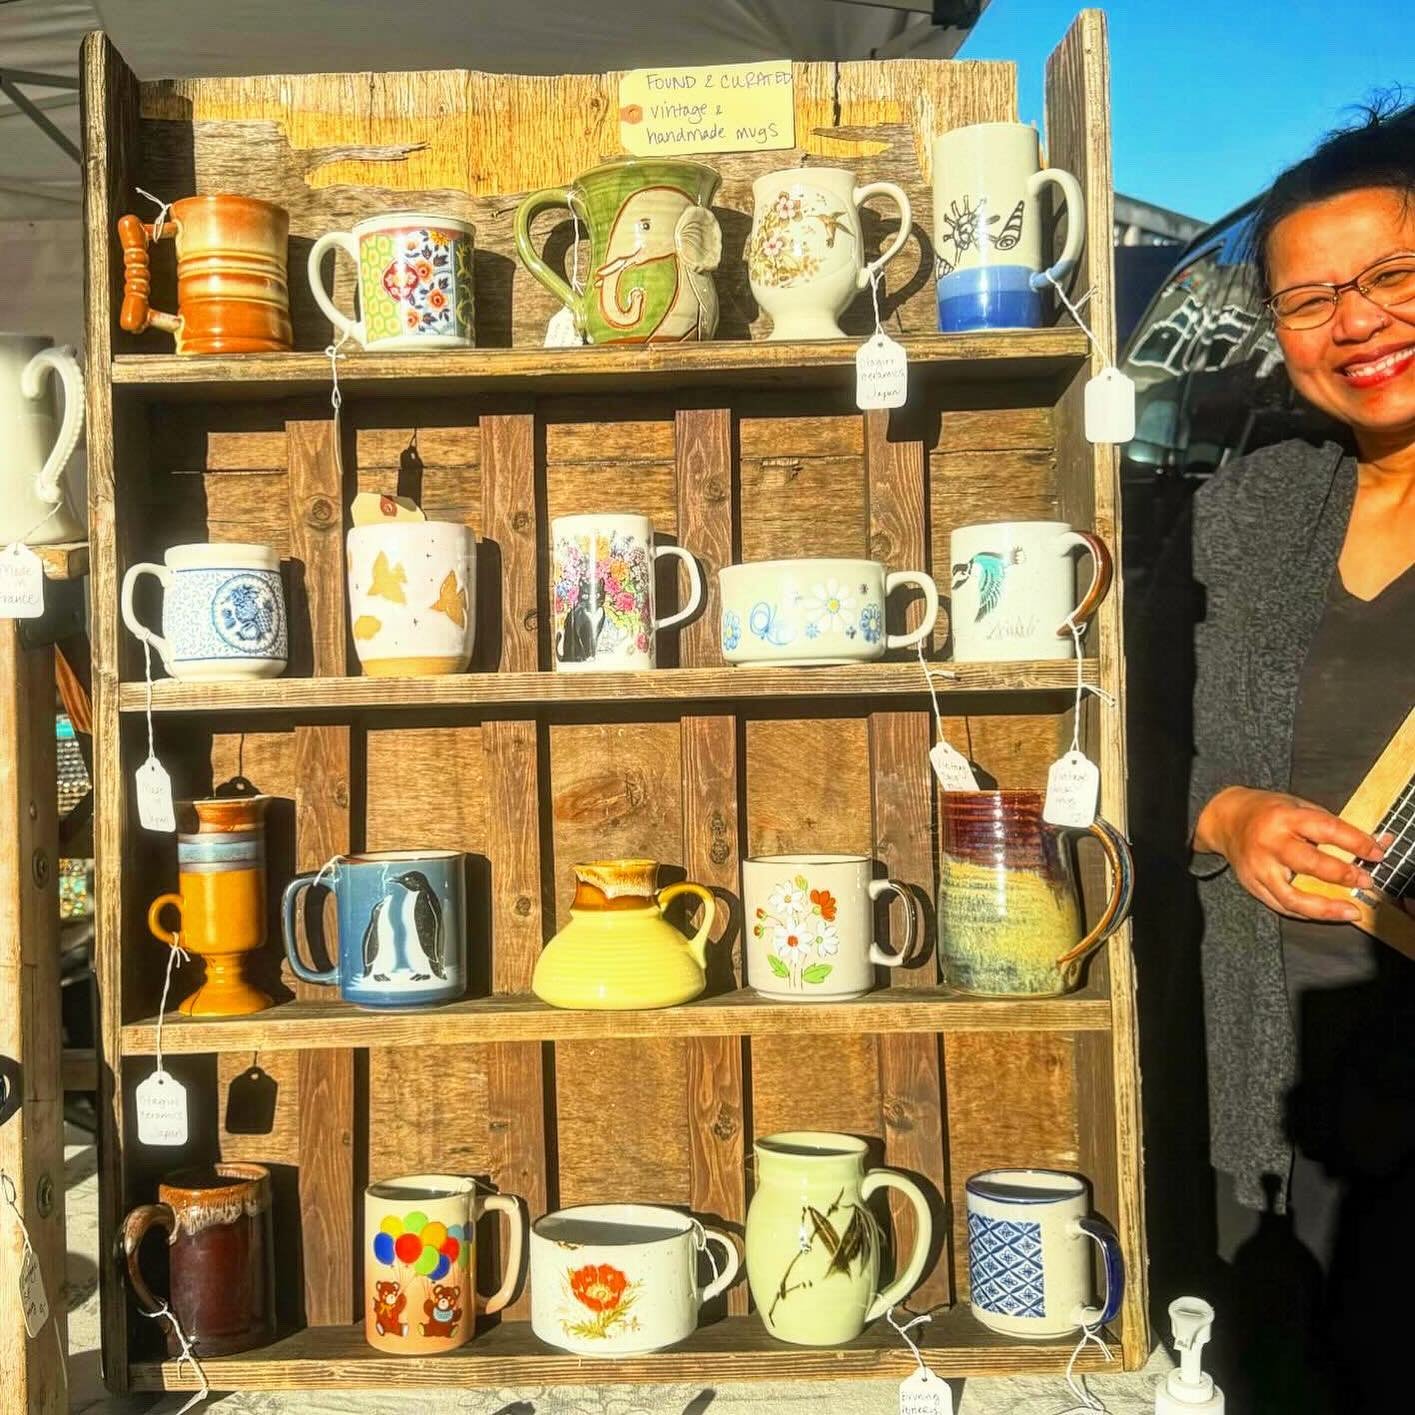 Looking for a fun new mug to add to your collection? Catch @teal.moonbeam curbside! #fleamarket #fremontsundaymarket #shopsmall #seattlefunevents #retailtherapy